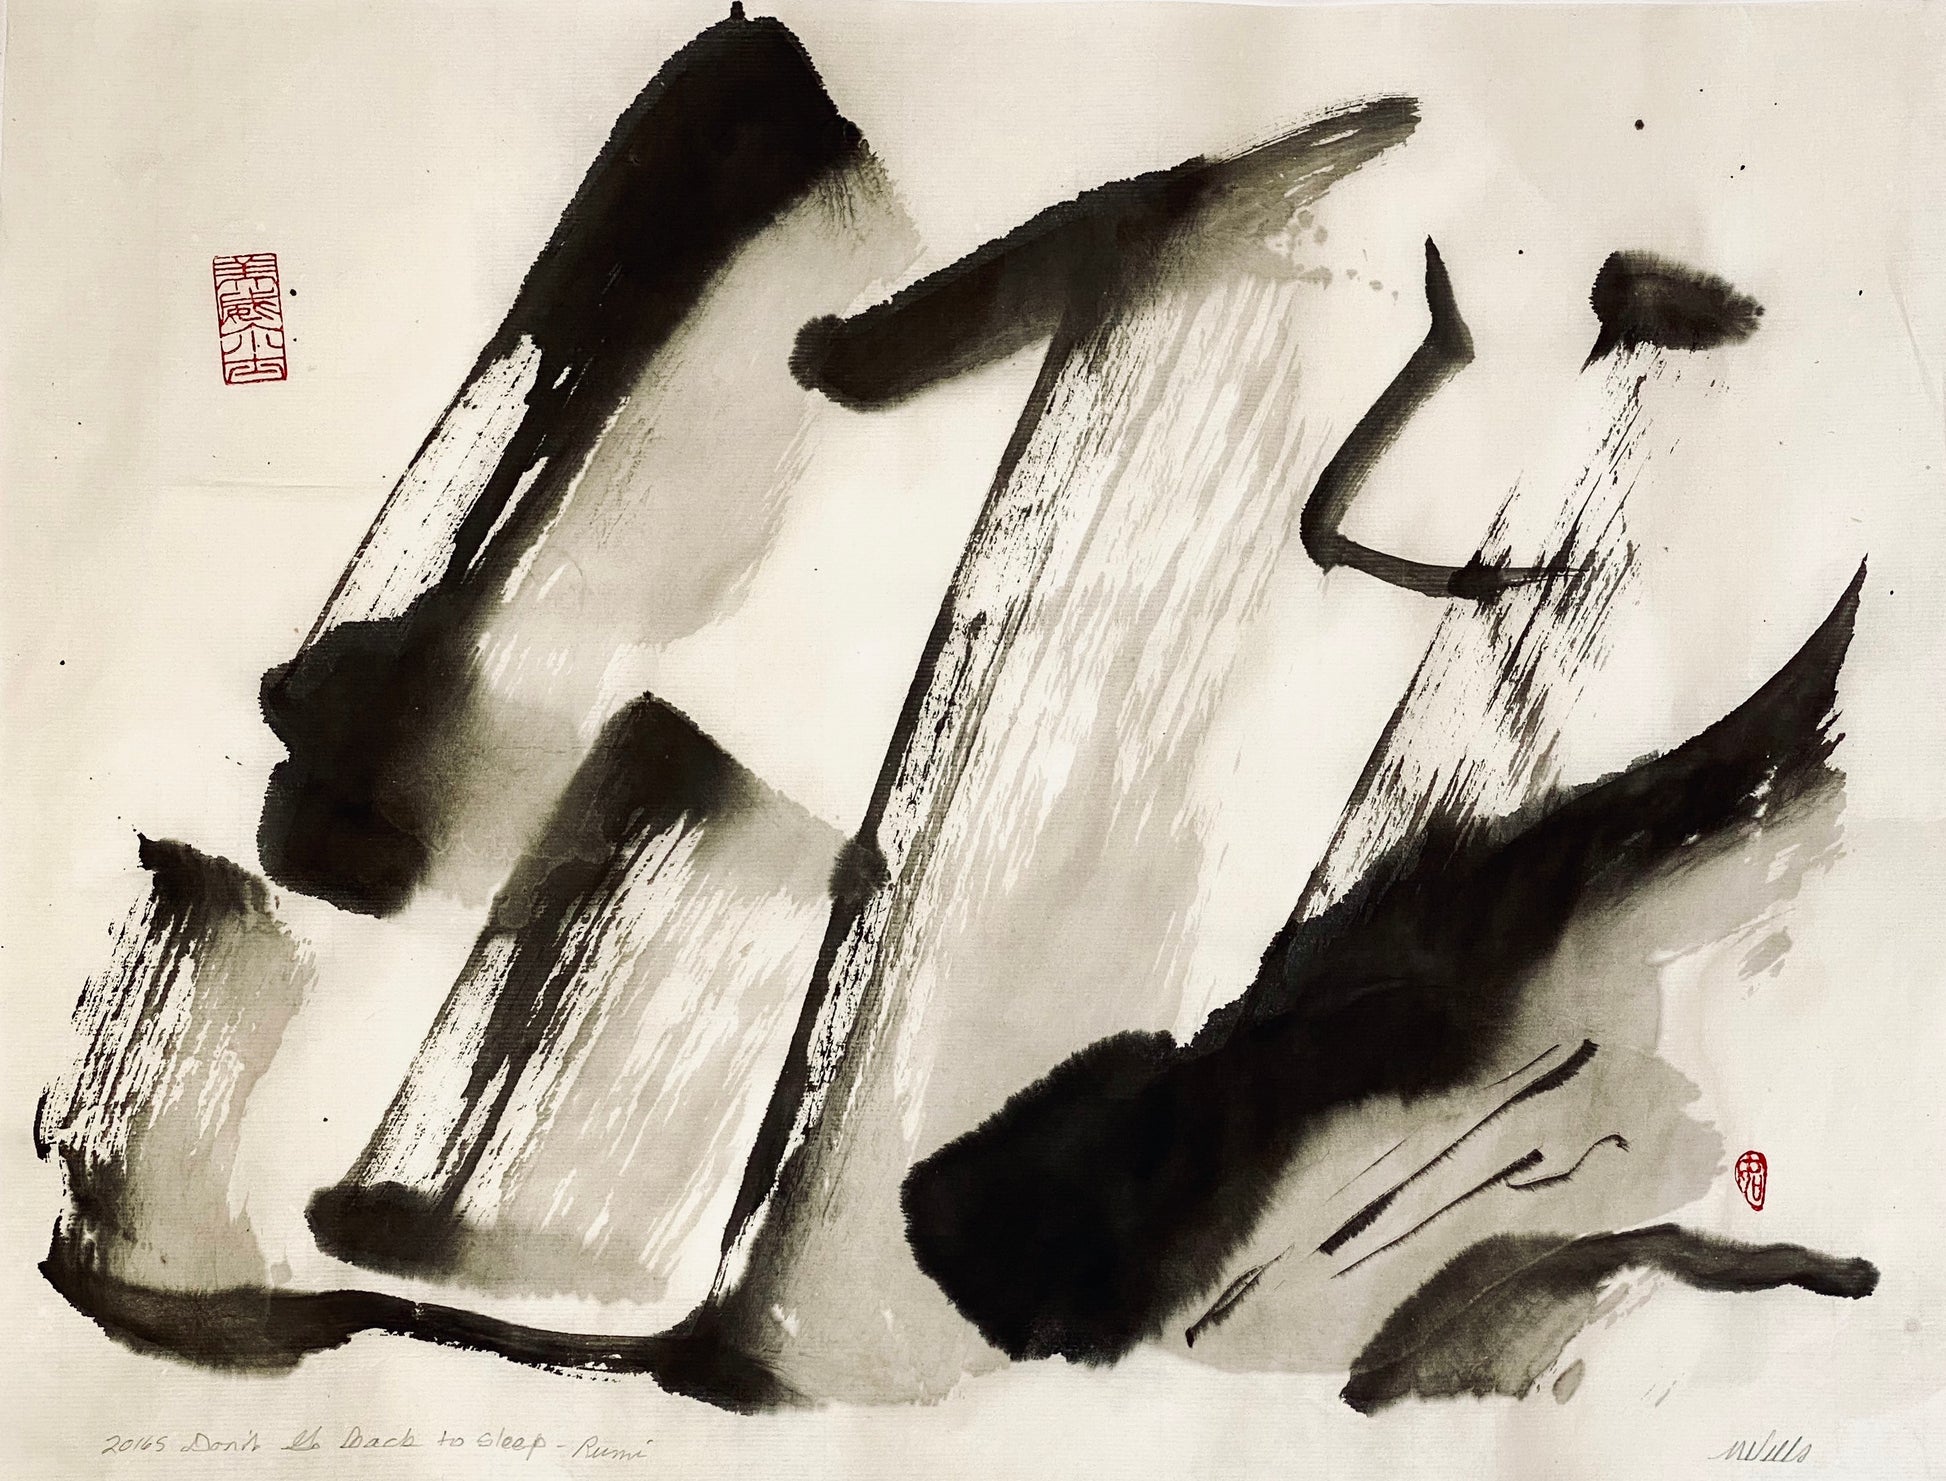 abstract sumi e painting, black ink and wash, by Marilyn Wells, "Don't Go Back to Sleep"